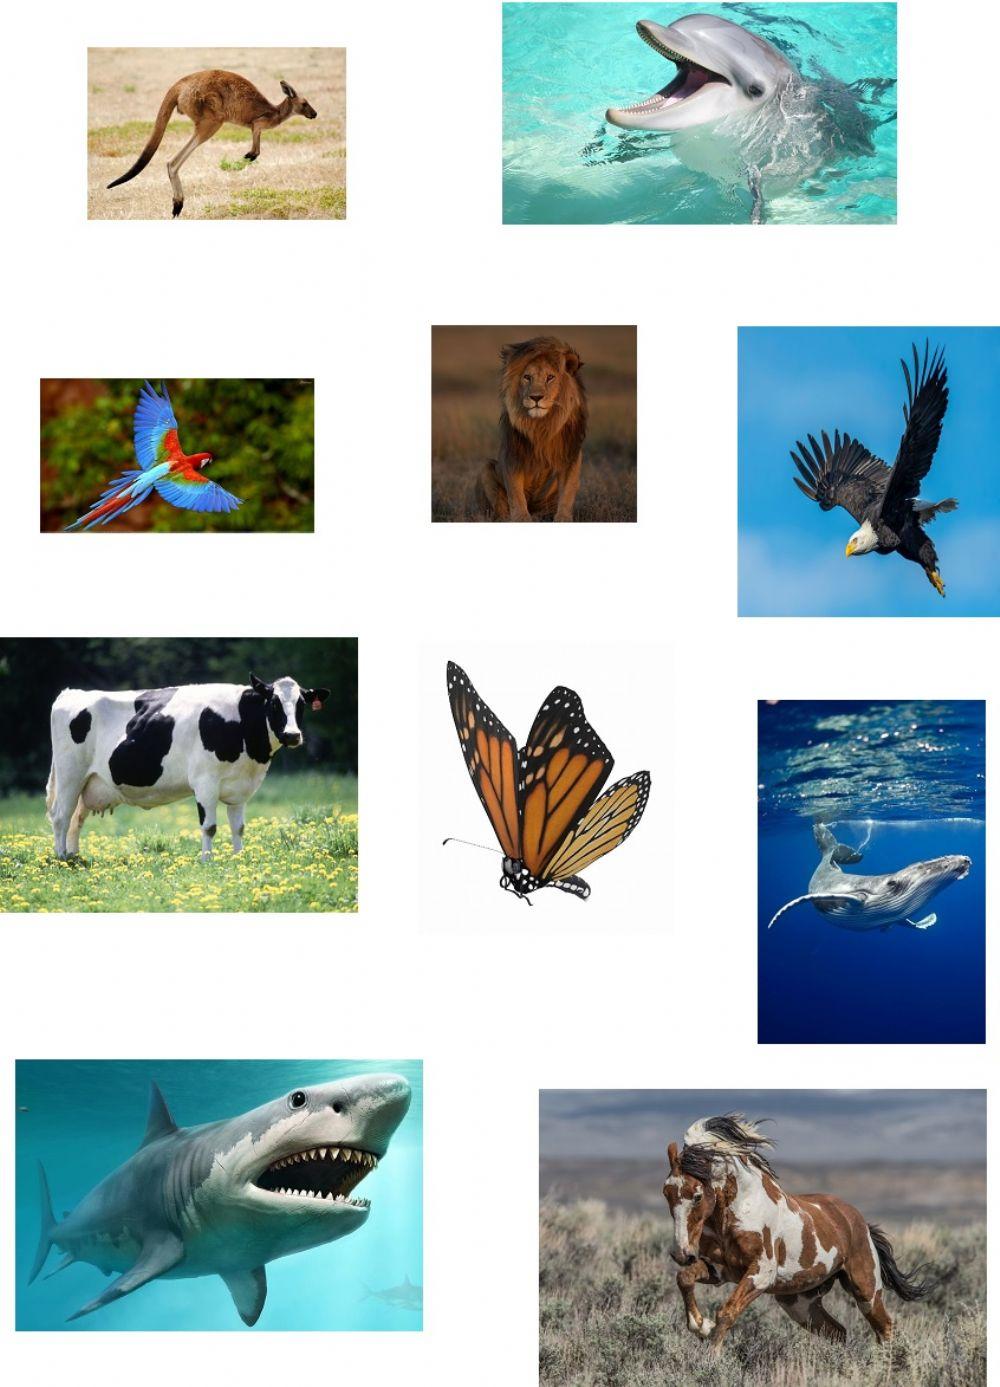 Air, land and water animals